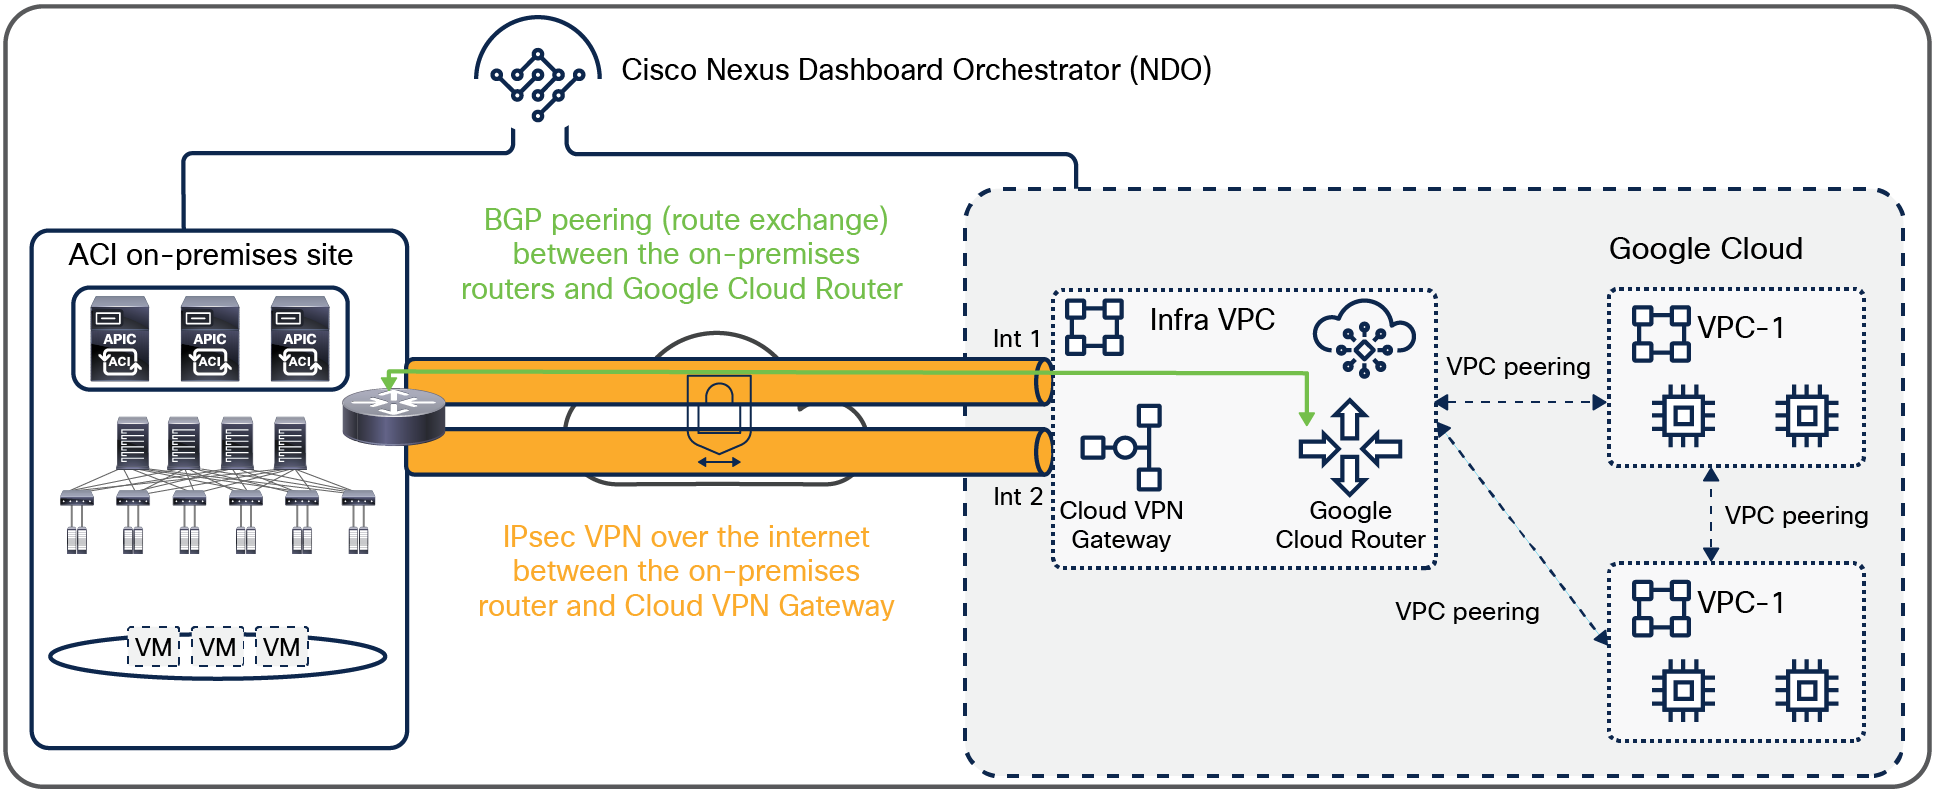 BGP peering between on-premises and cloud sites with Google Cloud Routers and Cloud VPN Gateway